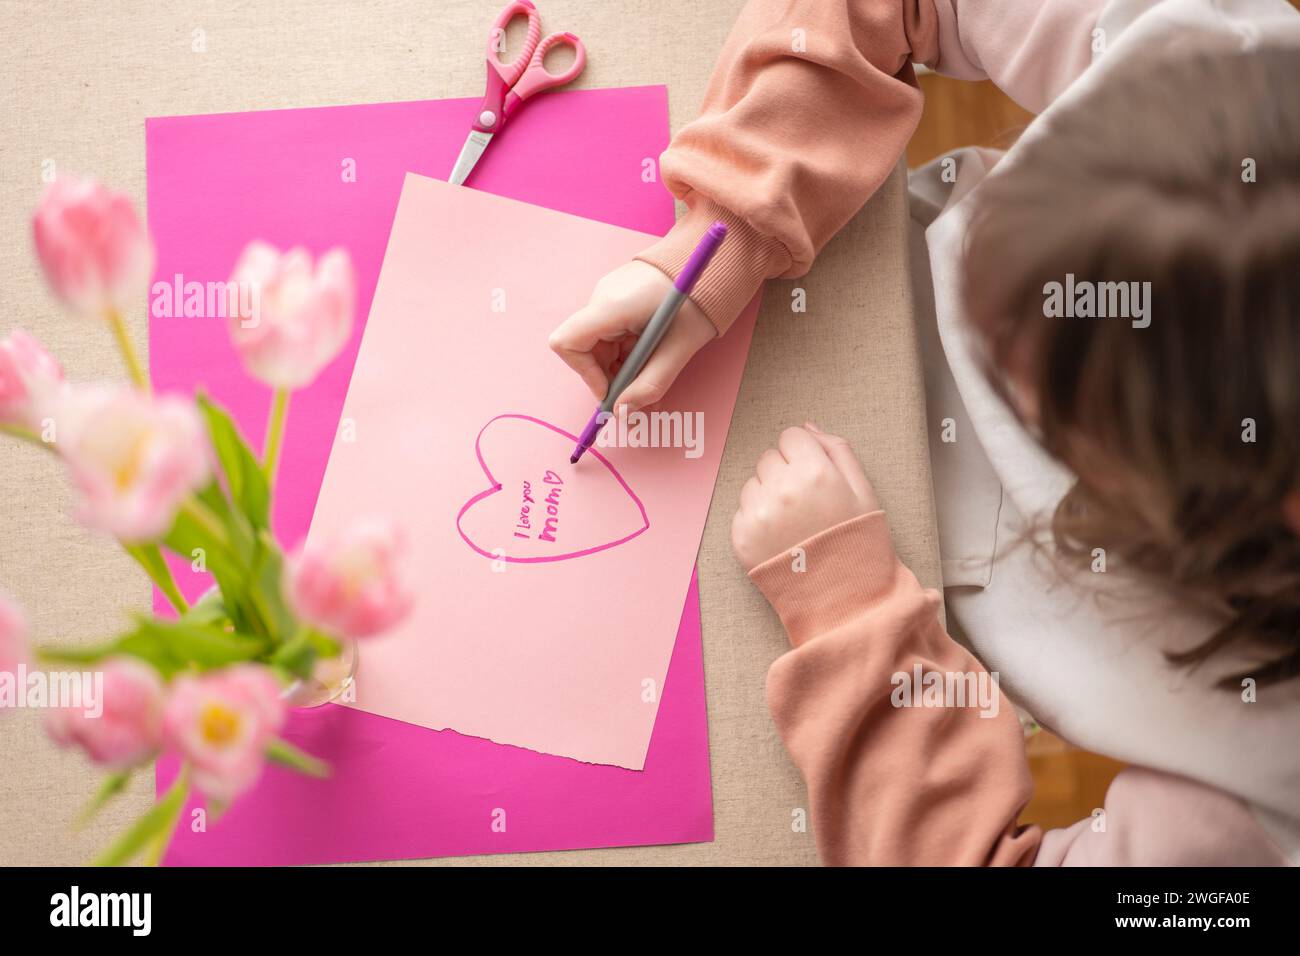 Mothers Day.daughter makes a card for his mother.Flowers and cards for mom.Daughter draws a card for mom.Message to mom.Child draws a heart and writes Stock Photo